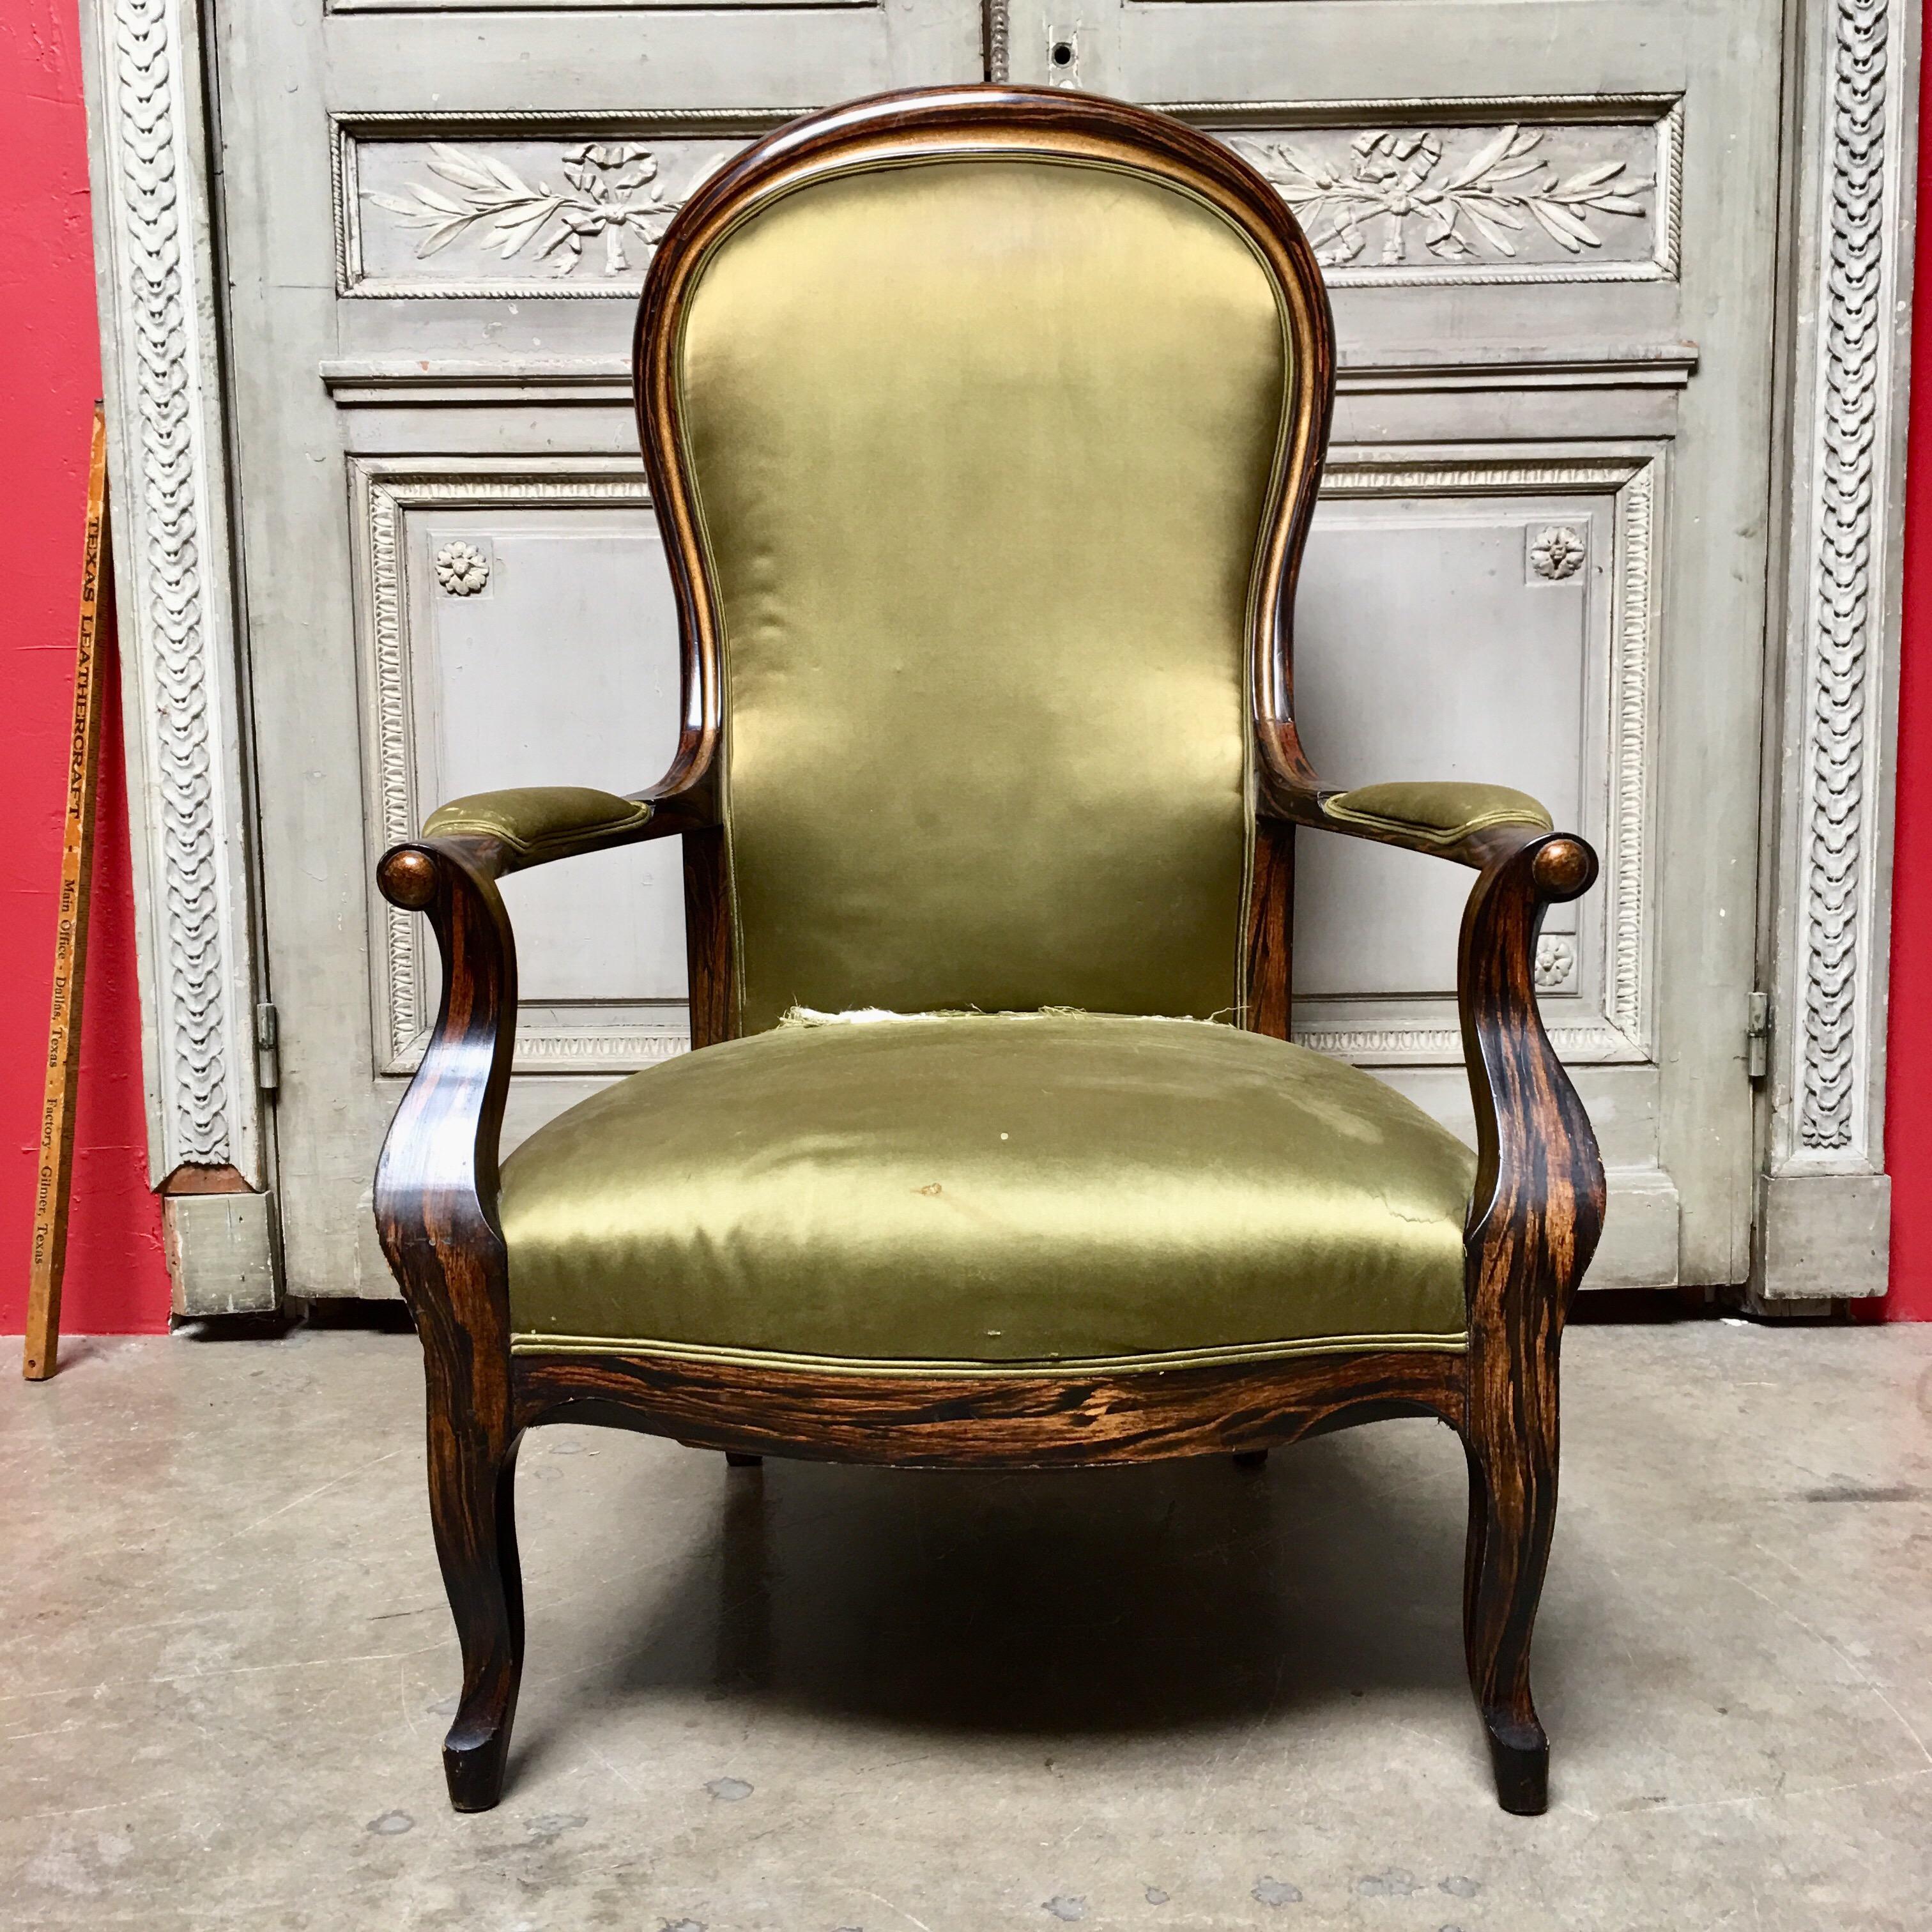 A 19th century French Voltaire Armchair with a faux rosewood painted finish. This imposing lounge chair has a wide well-sprung seat pad sitting on pleasing out-swept cabriole legs. A very solid and classic chair. 


  